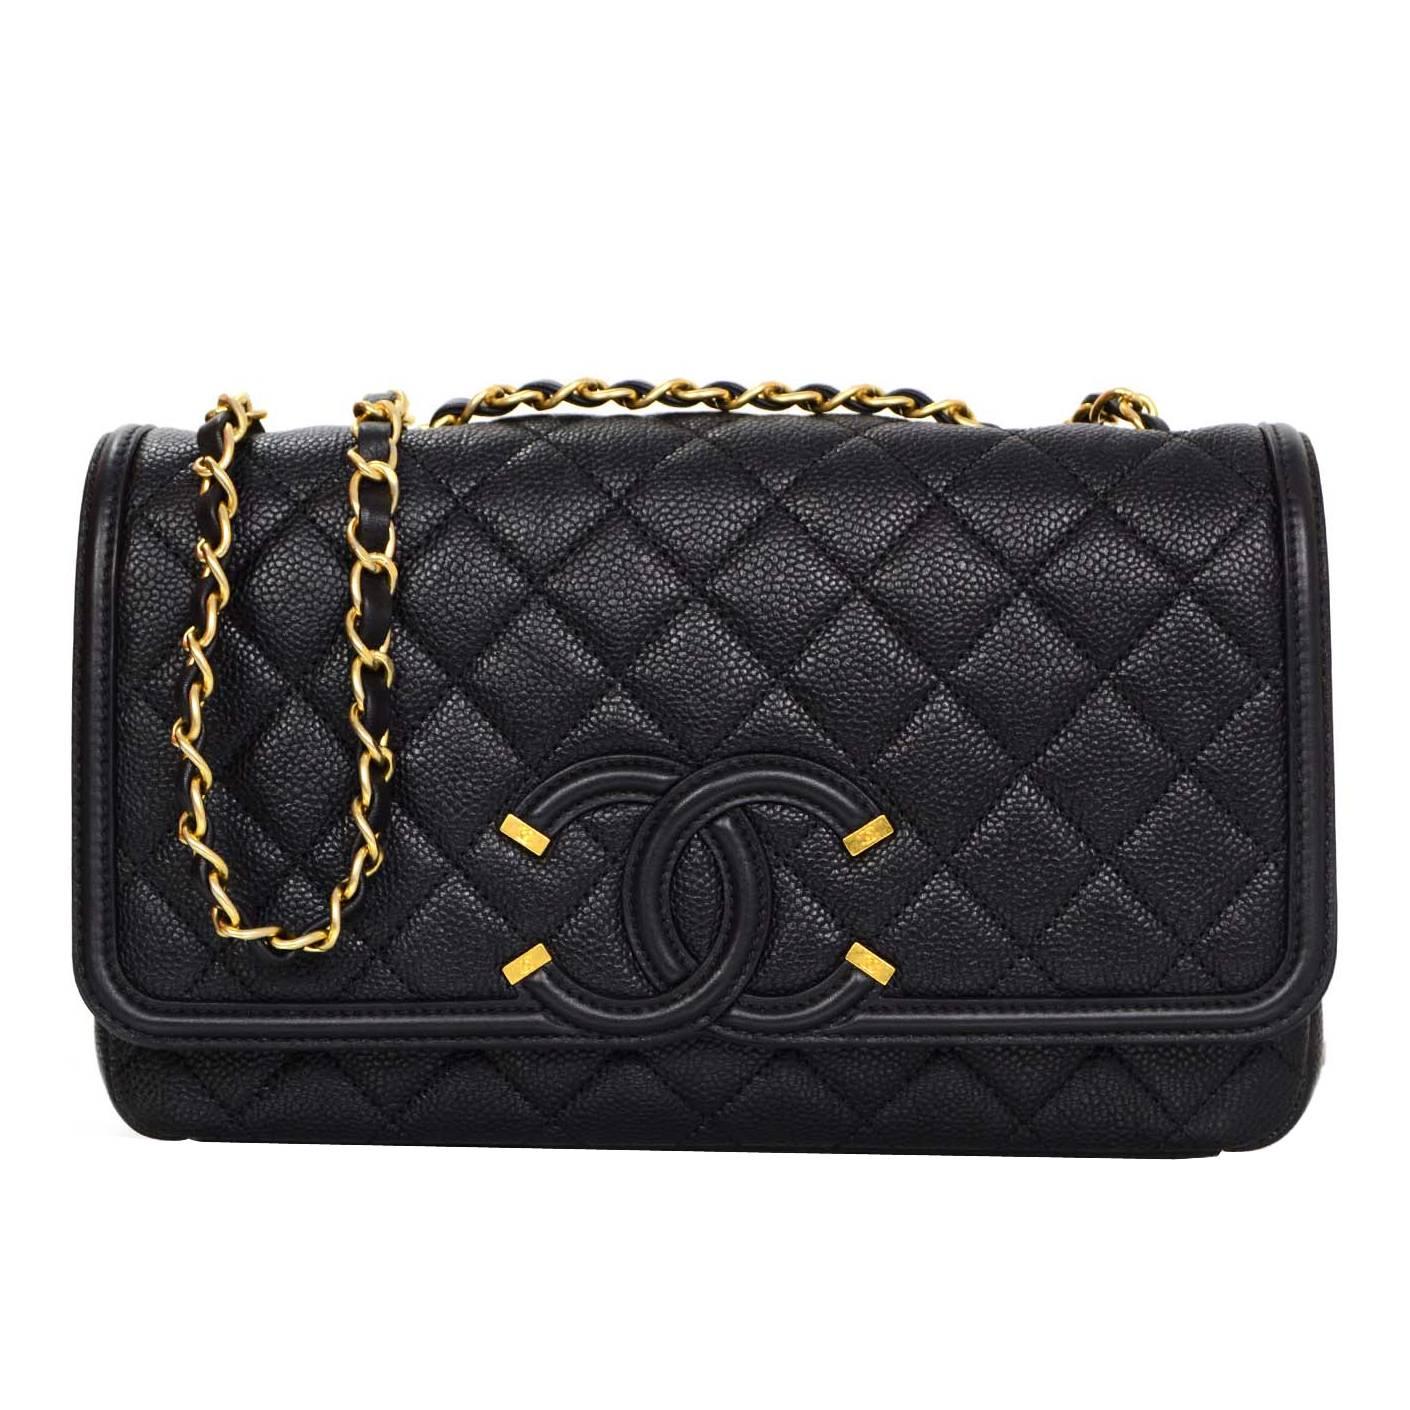 Chanel 2016 Black Quilted Caviar Leather Filigree CC Flap Bag